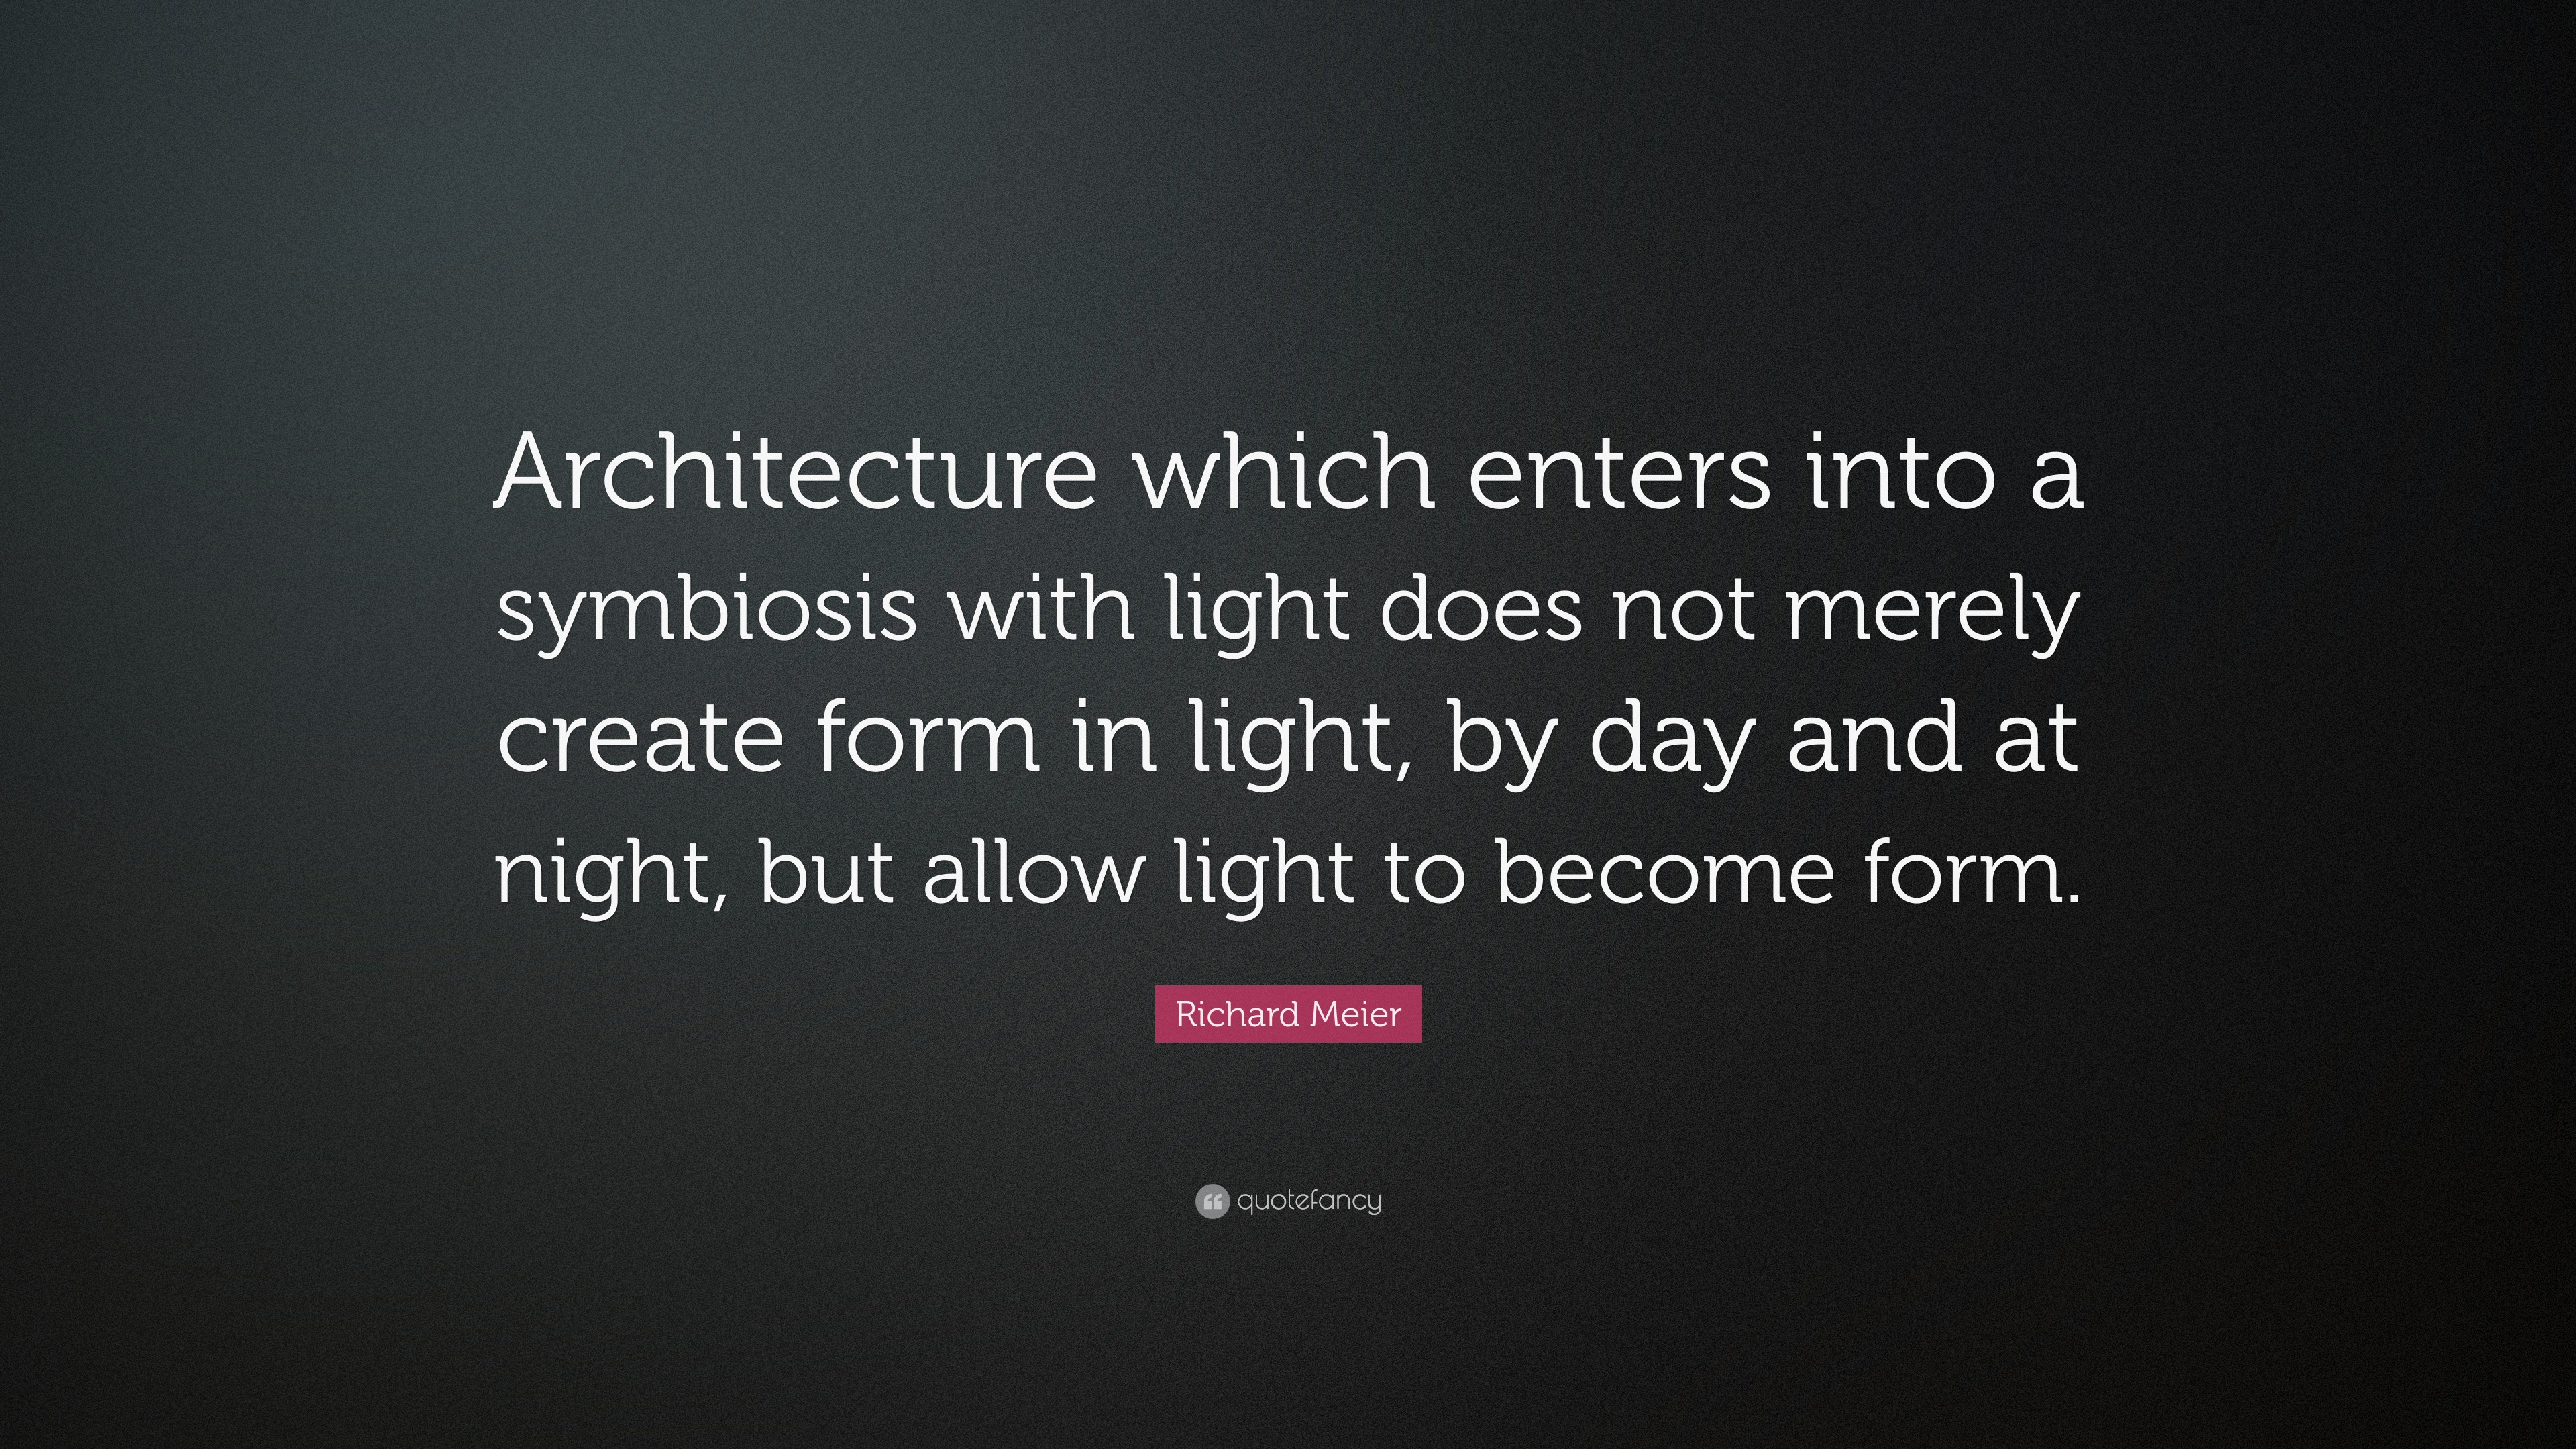 Richard Meier Quote: “Architecture which enters into a symbiosis with ...